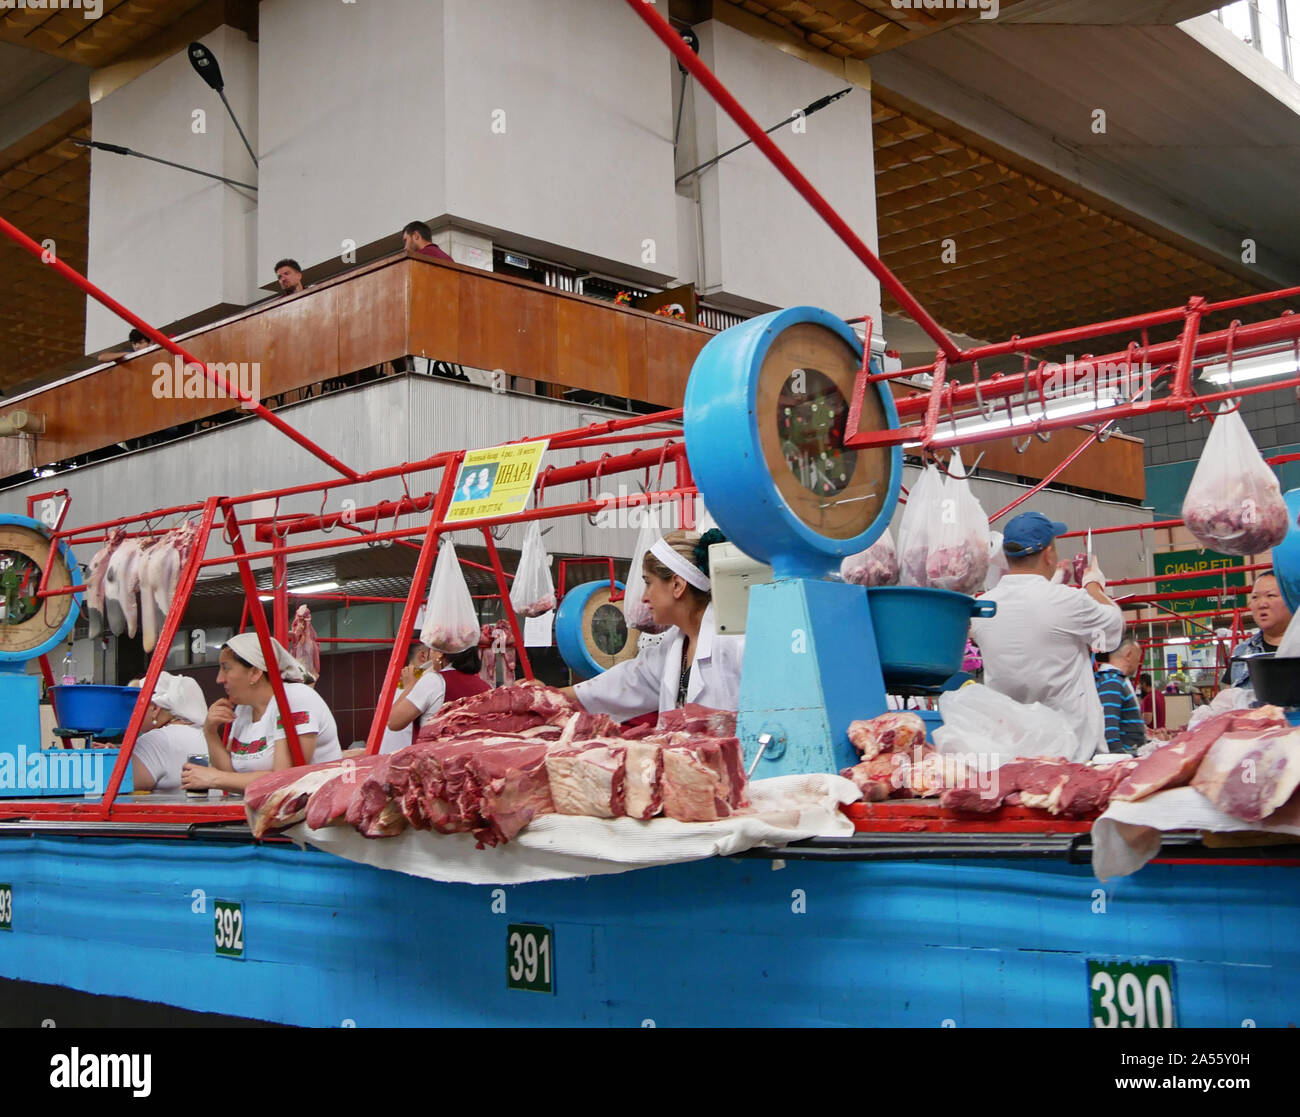 Almaty, Kazakhstan - August 22, 2019: People and goods in the meat section of the famous Green Bazaar of Almaty, Kazakhstan. Stock Photo